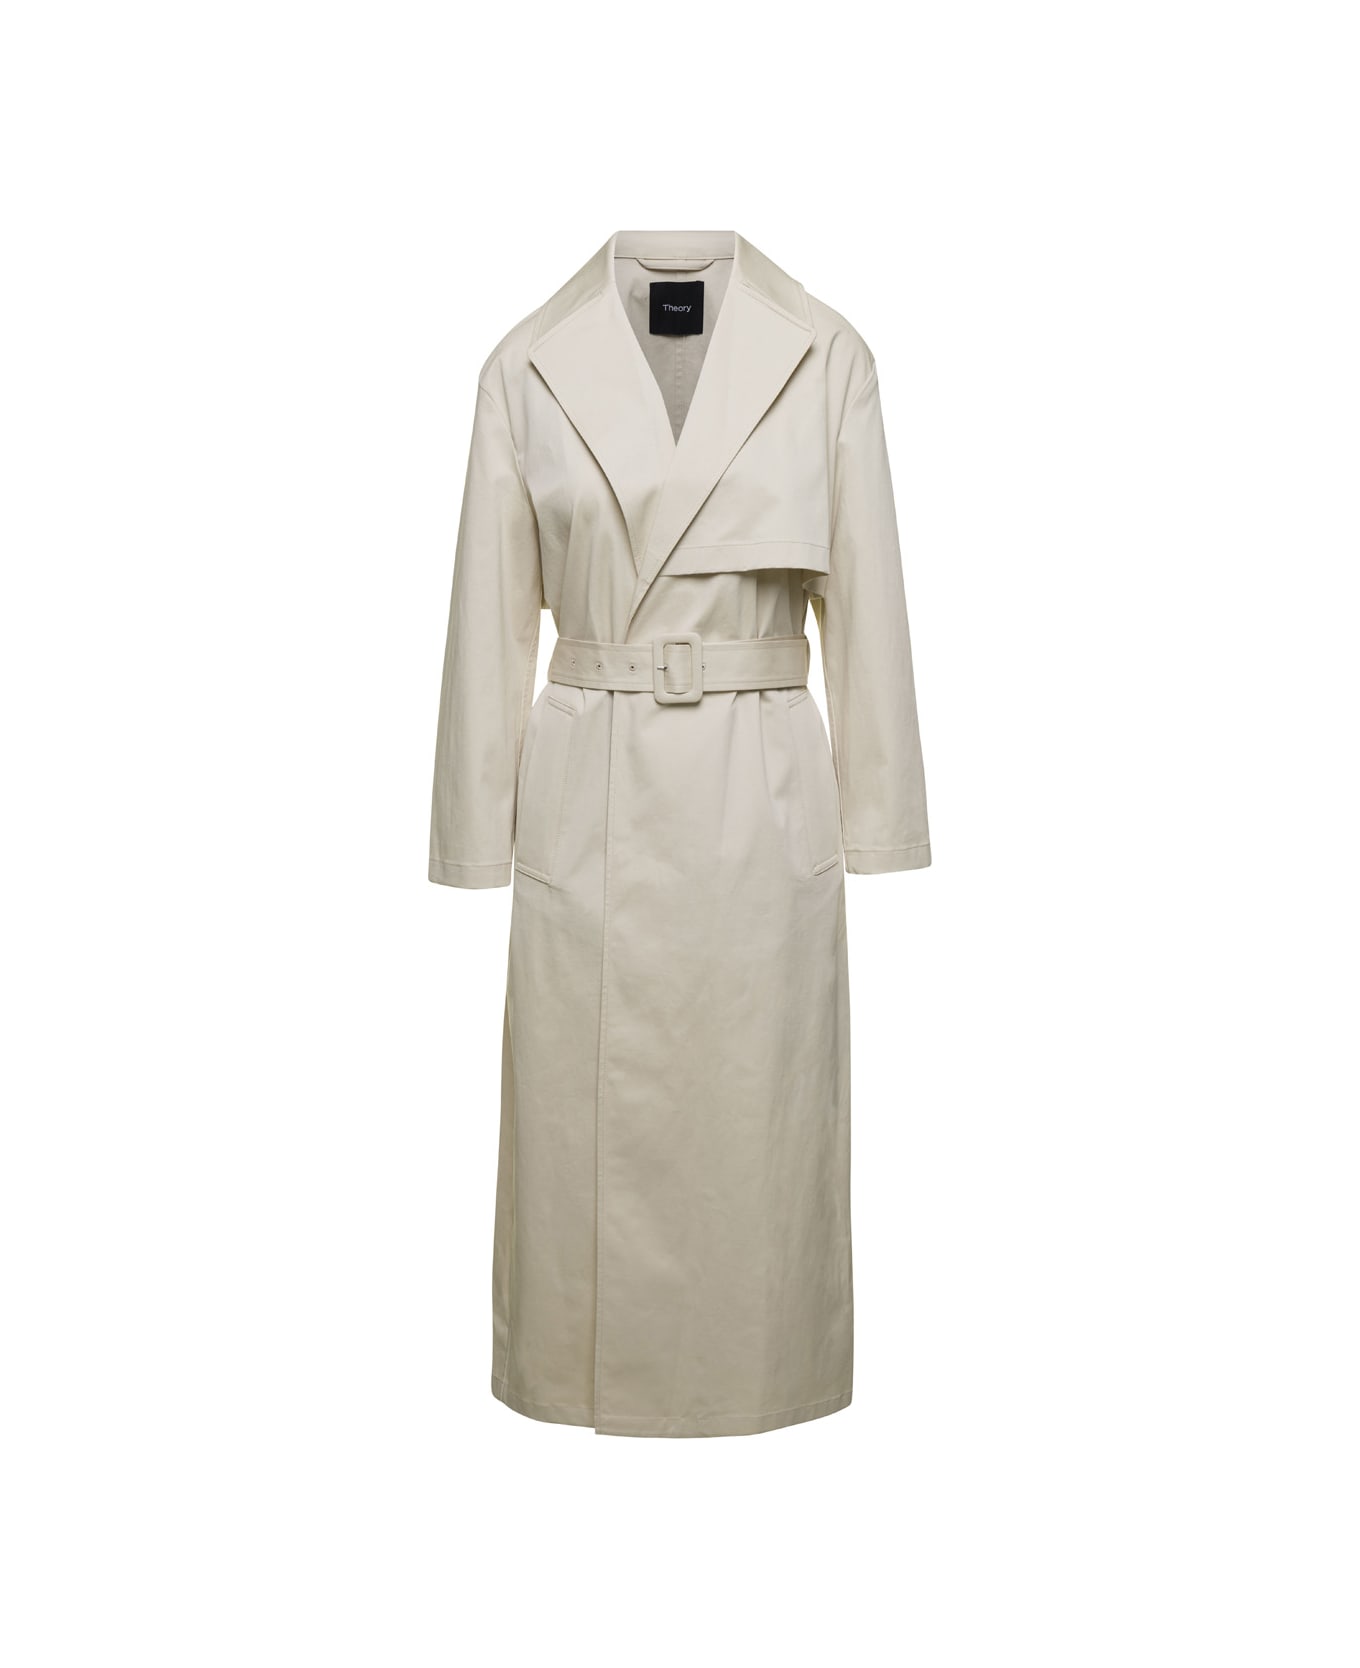 Theory Beige Double- Breasted Trench Coat In Cotton Stretch Woman - Beige